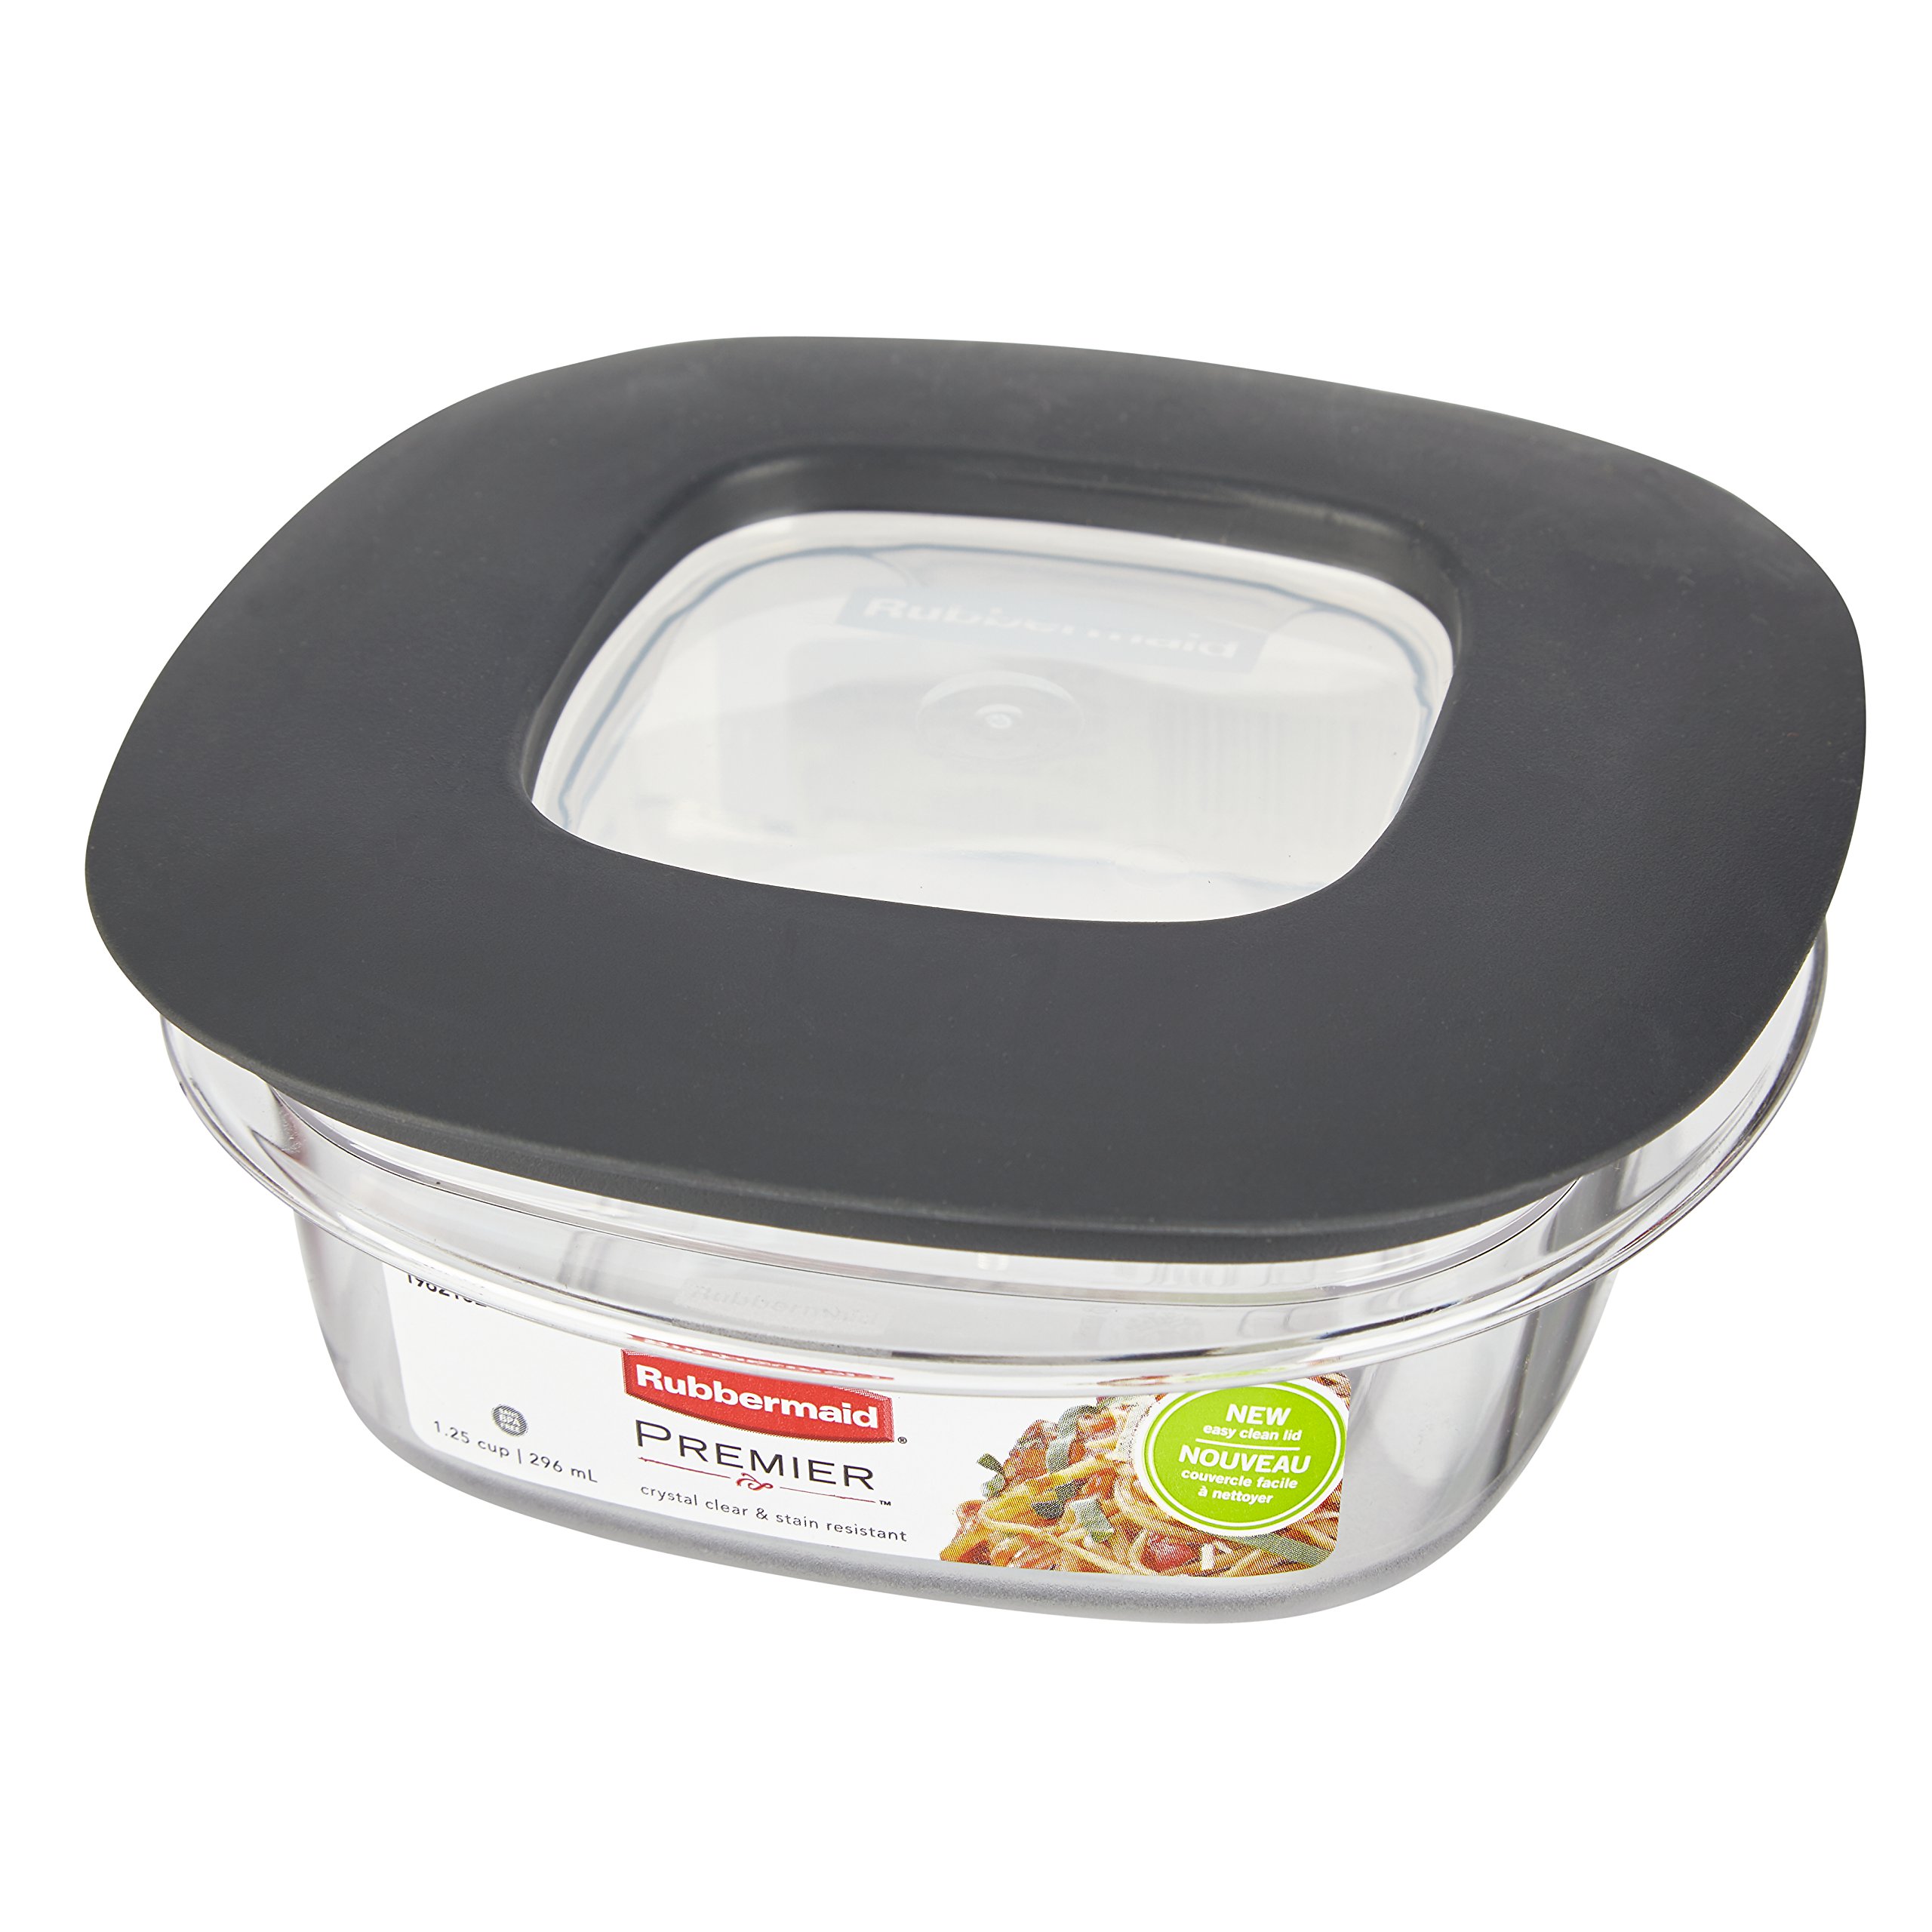 Rubbermaid Premier Easy Find Lids Food Storage Containers, 1.25 Cup, Gray